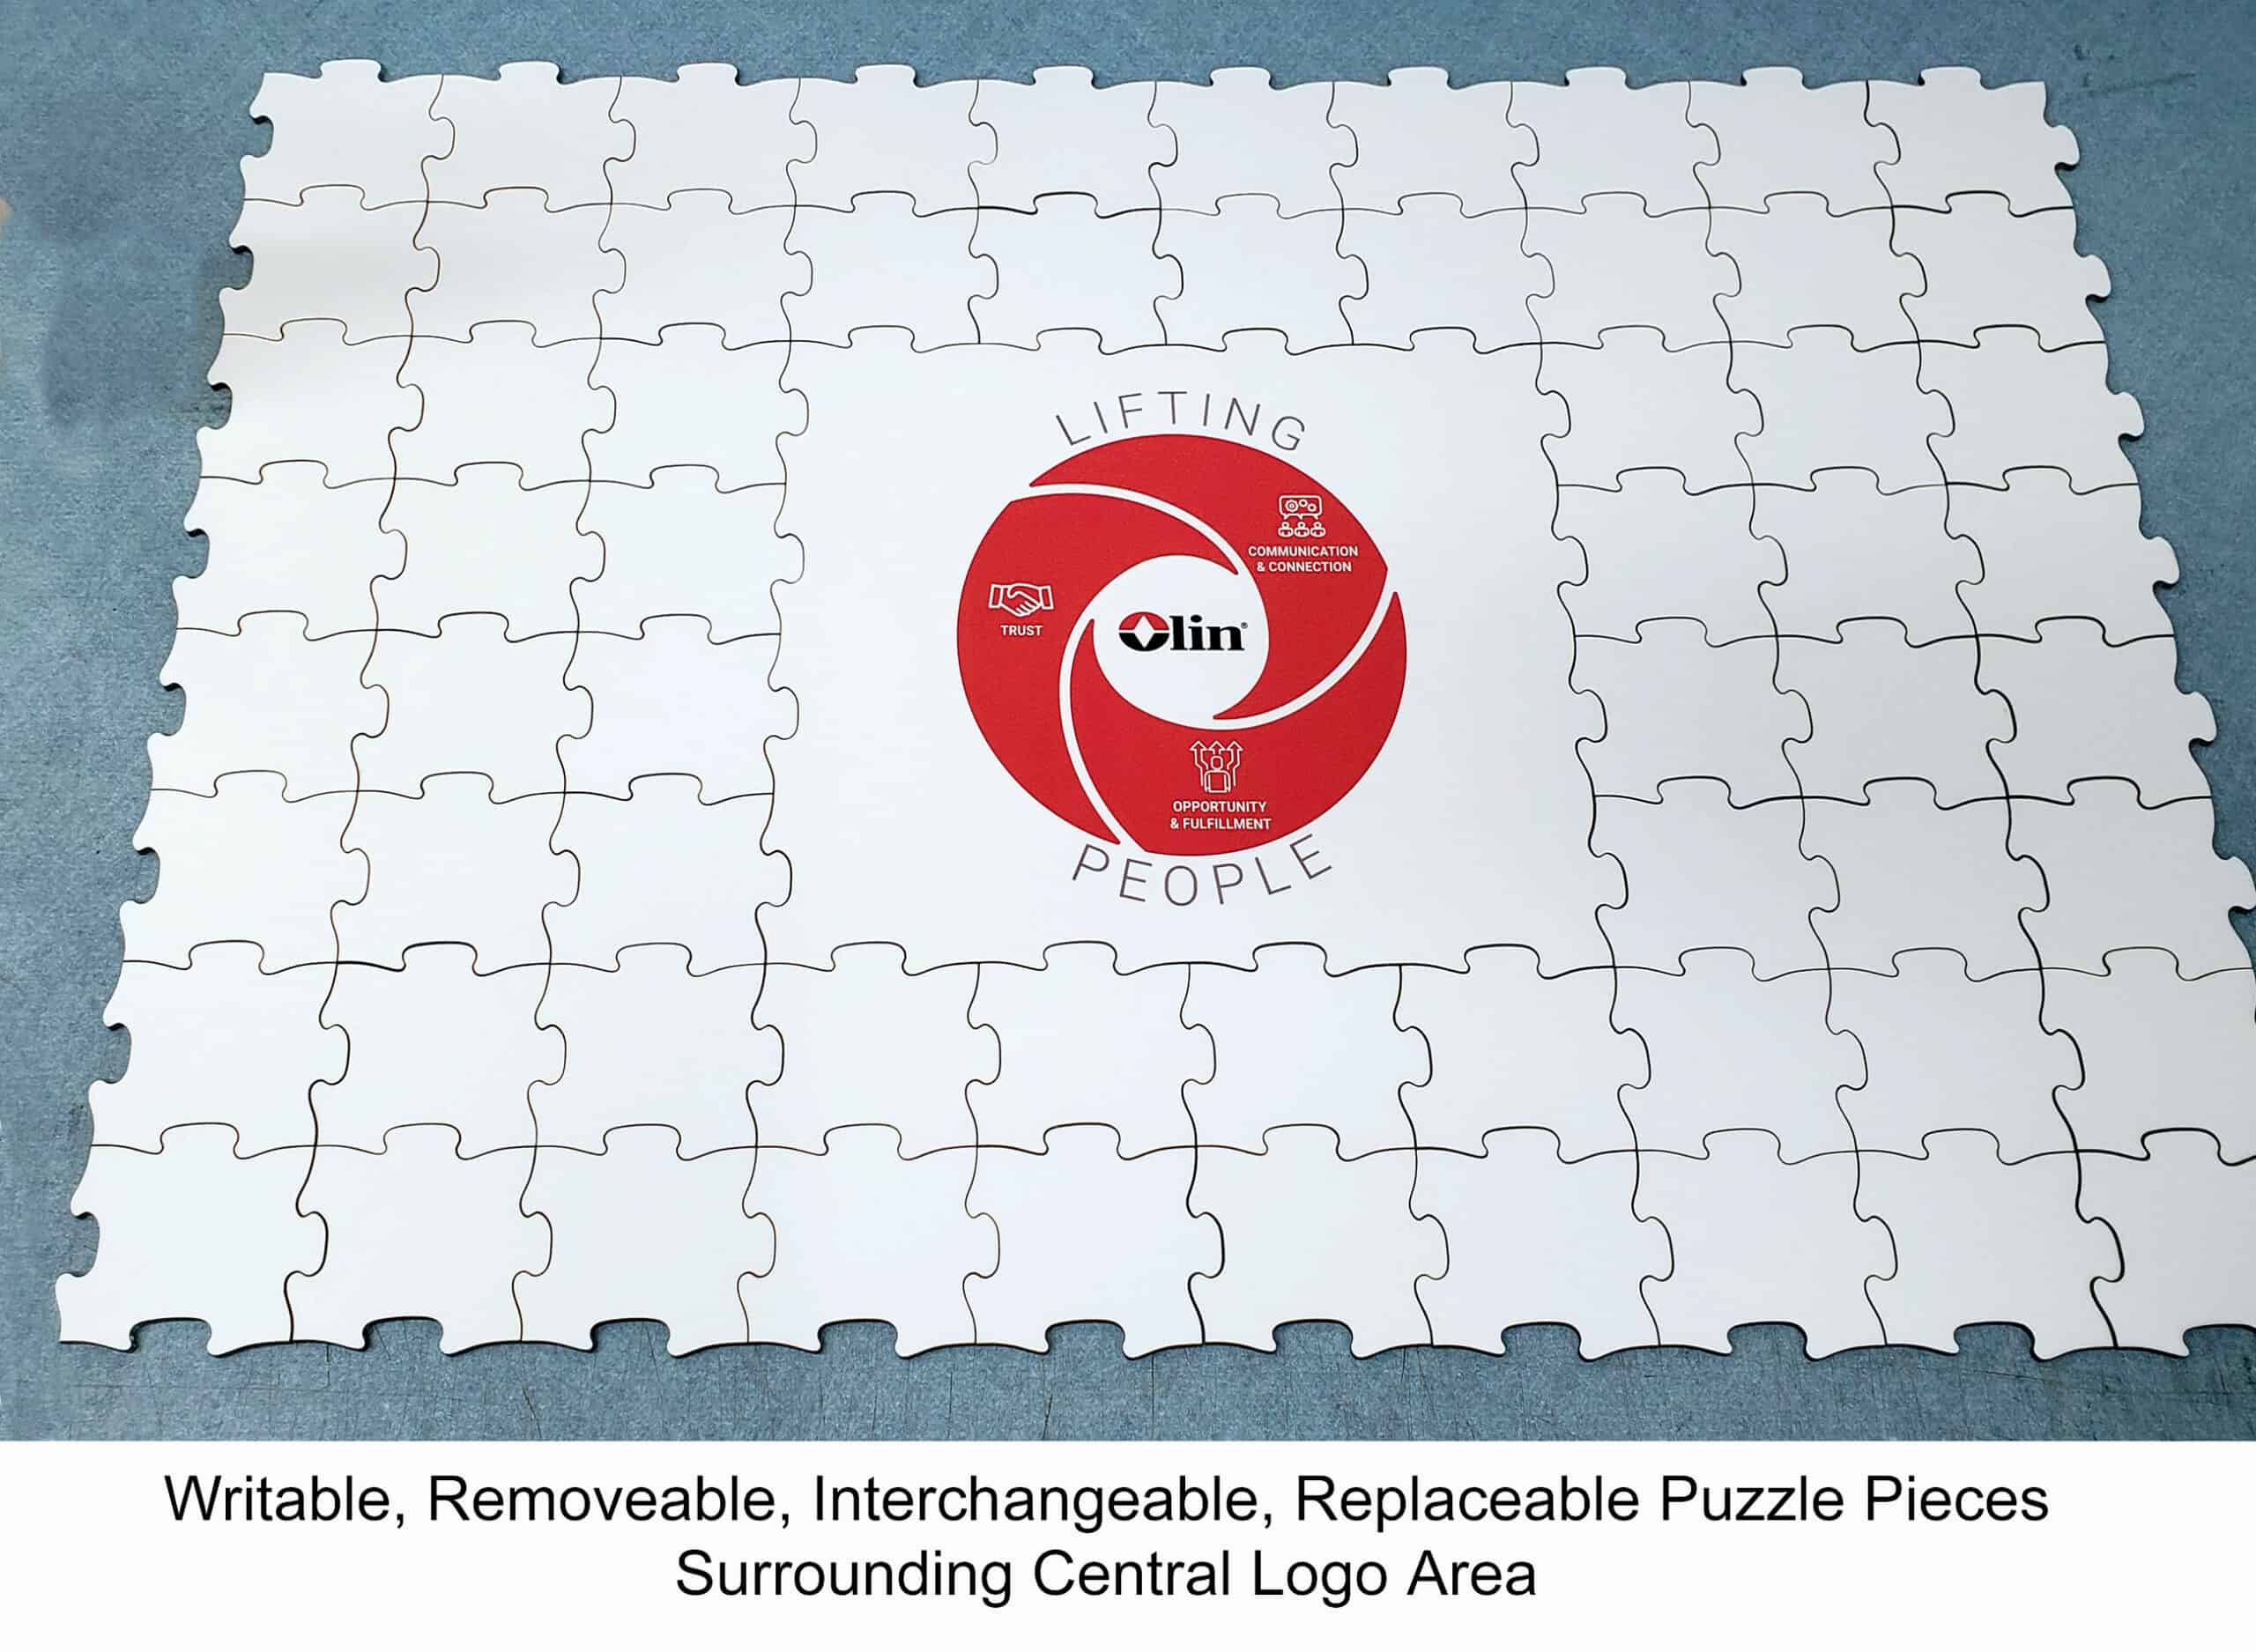 Custom puzzle example of logo puzzle surrounded by same shape writable pieces that go anywhere